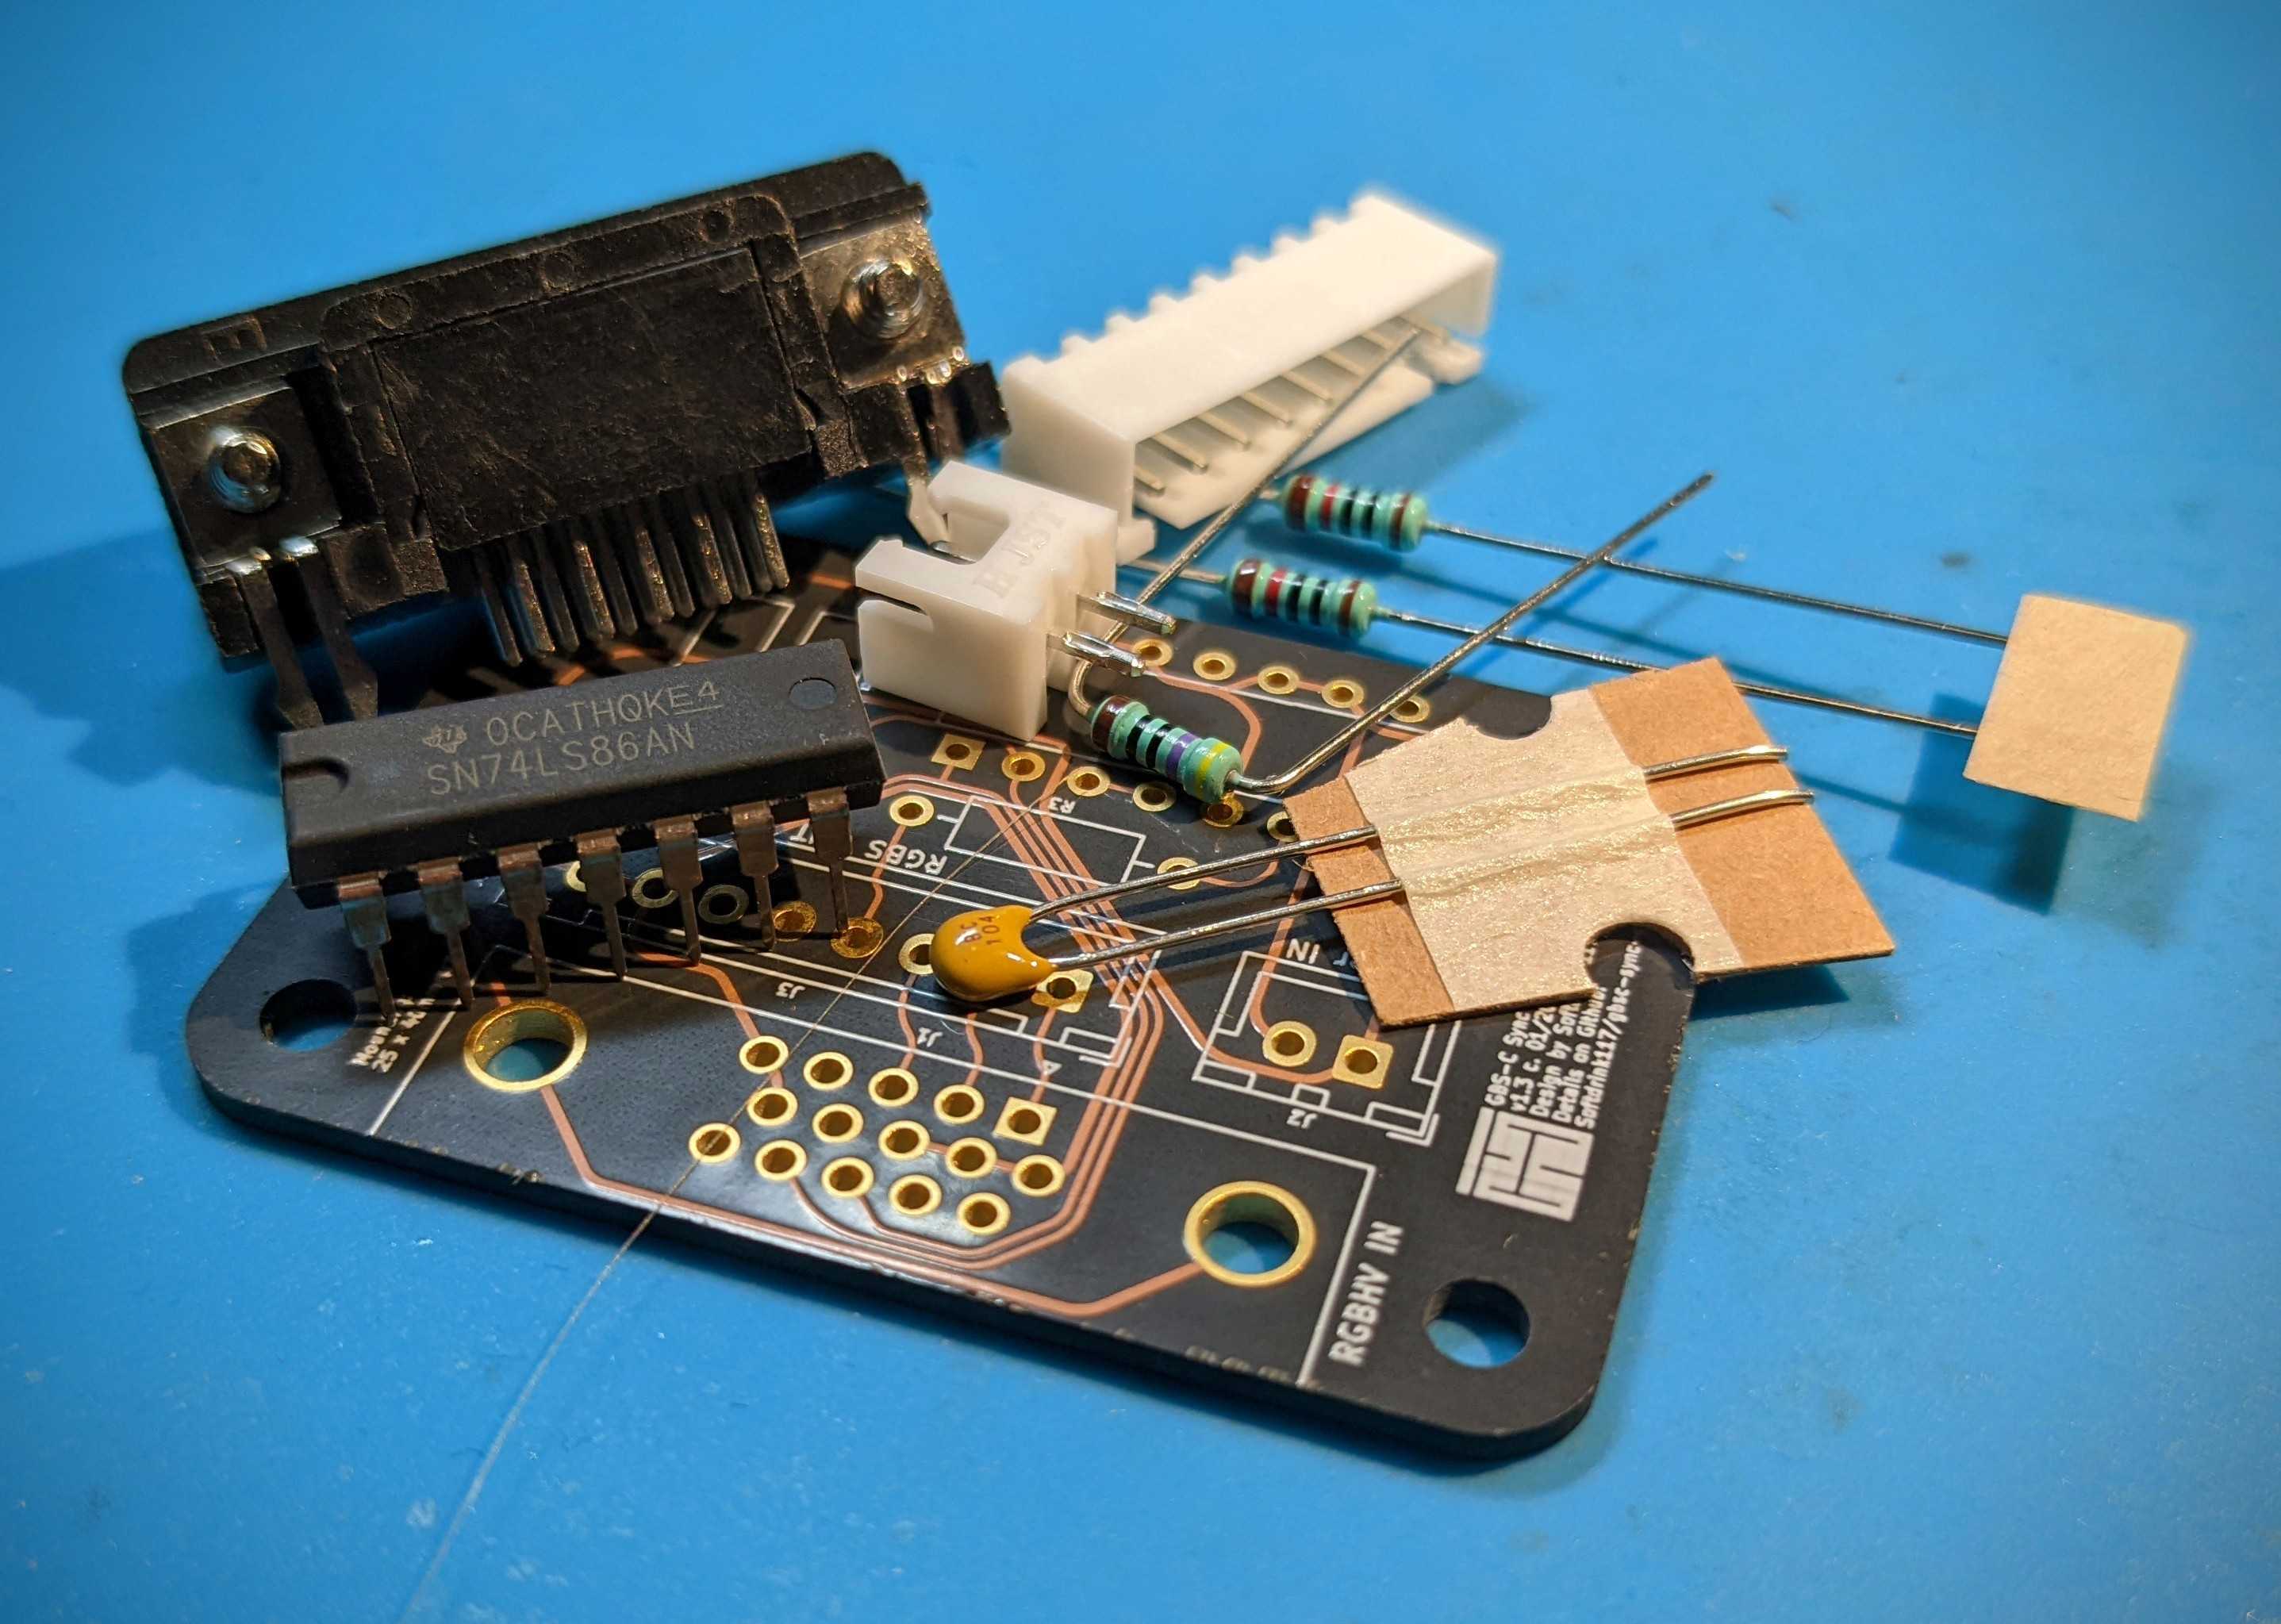 The components for a sync combiner board.